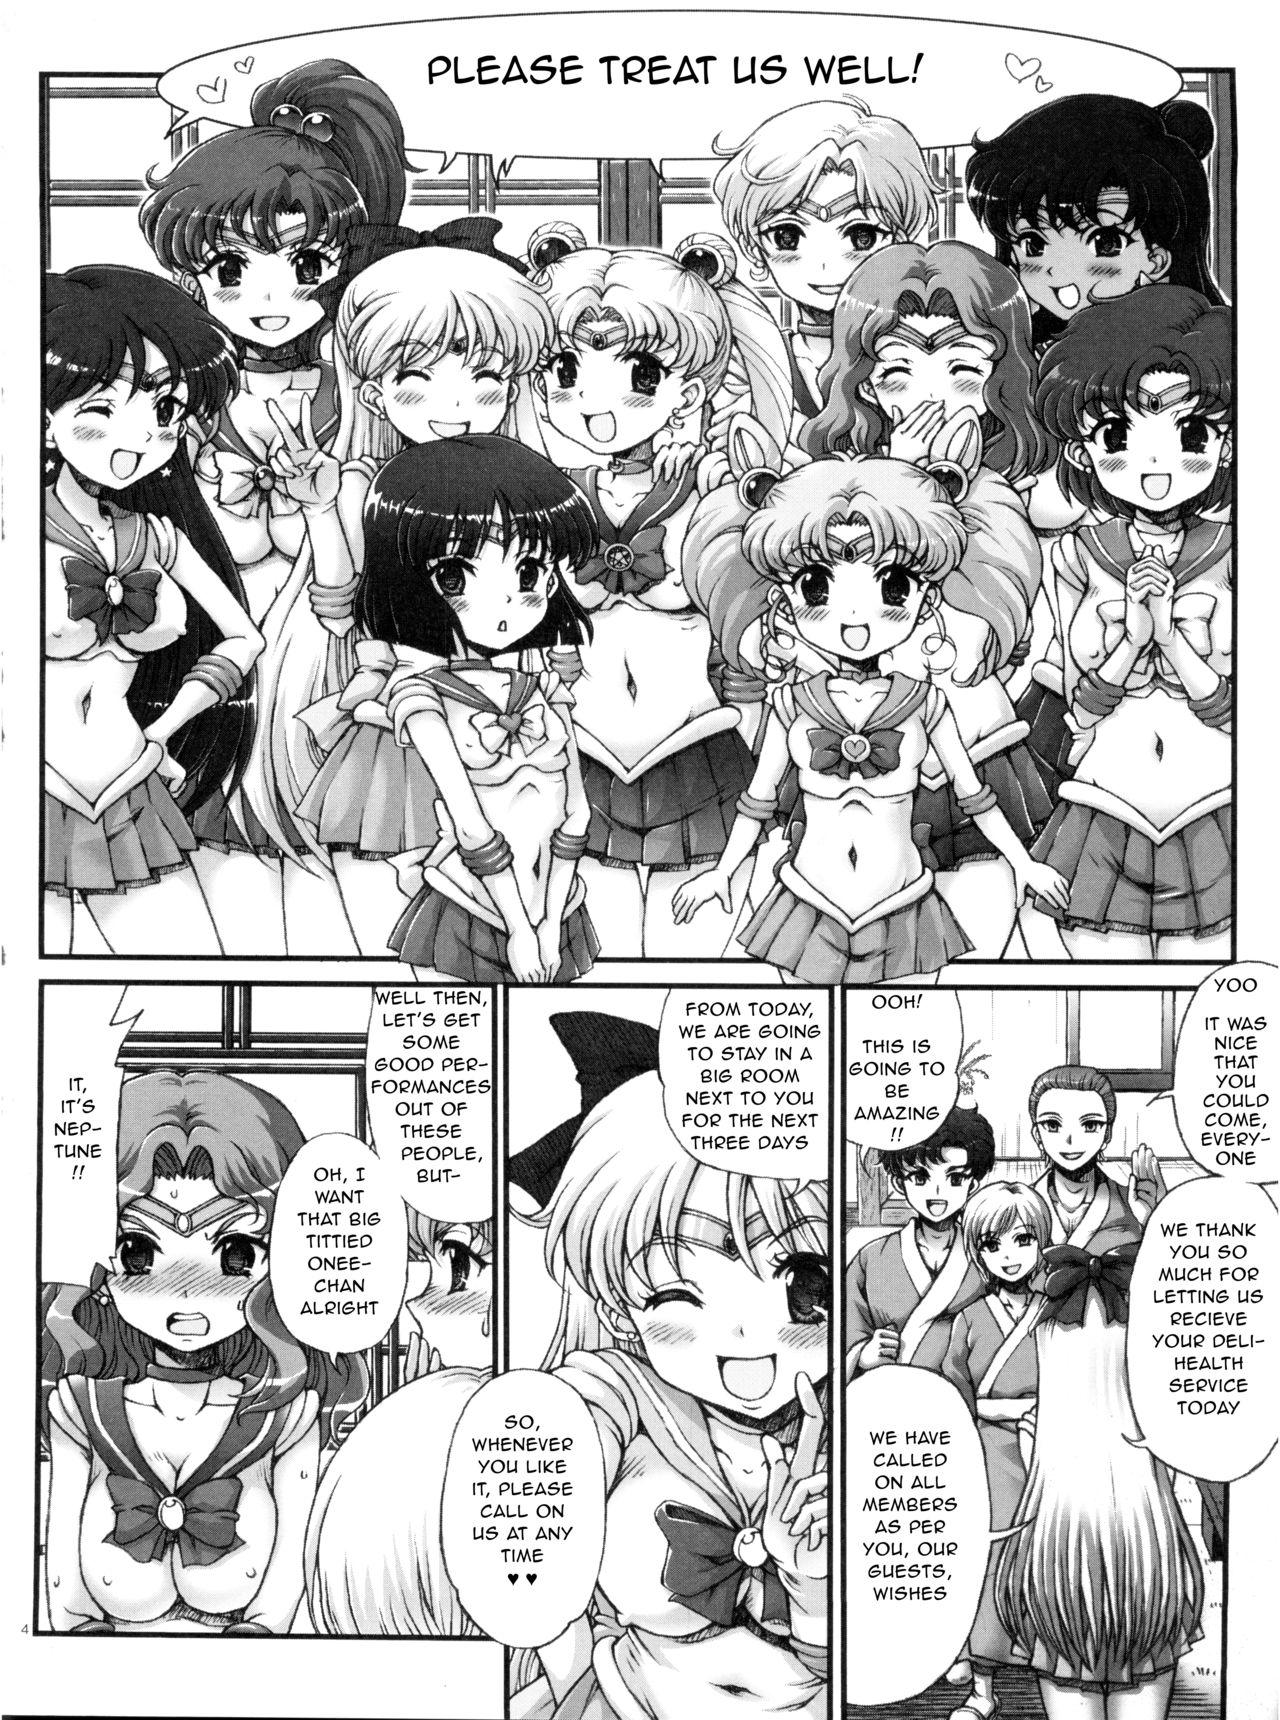 Girls Sailor Delivery Health All Stars - Sailor moon Alternative - Page 3